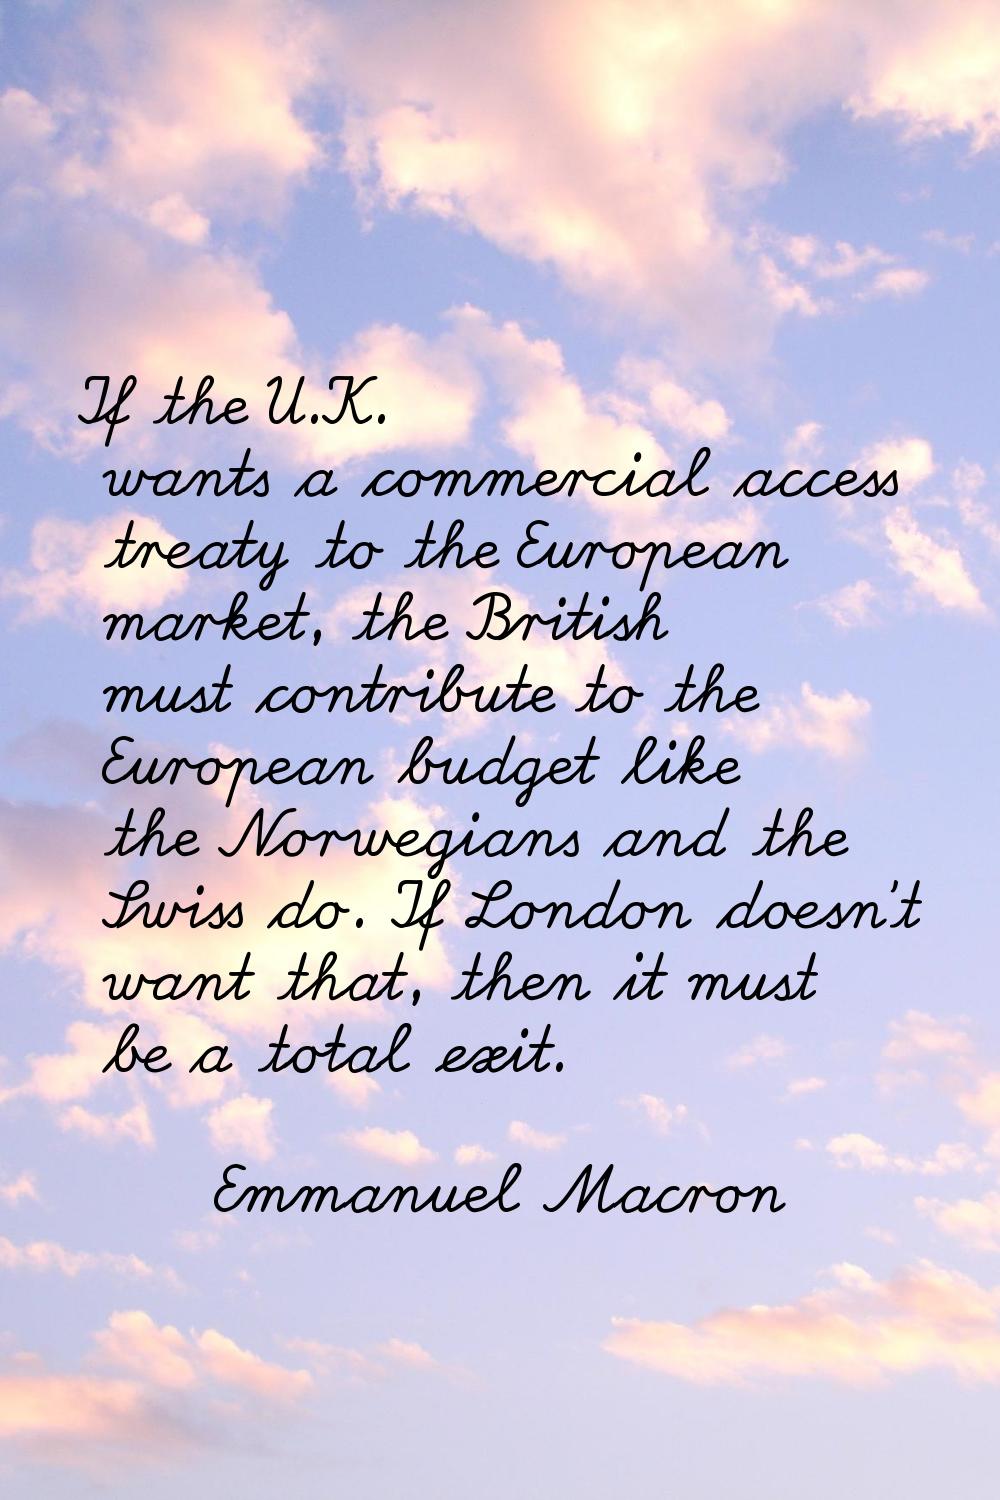 If the U.K. wants a commercial access treaty to the European market, the British must contribute to